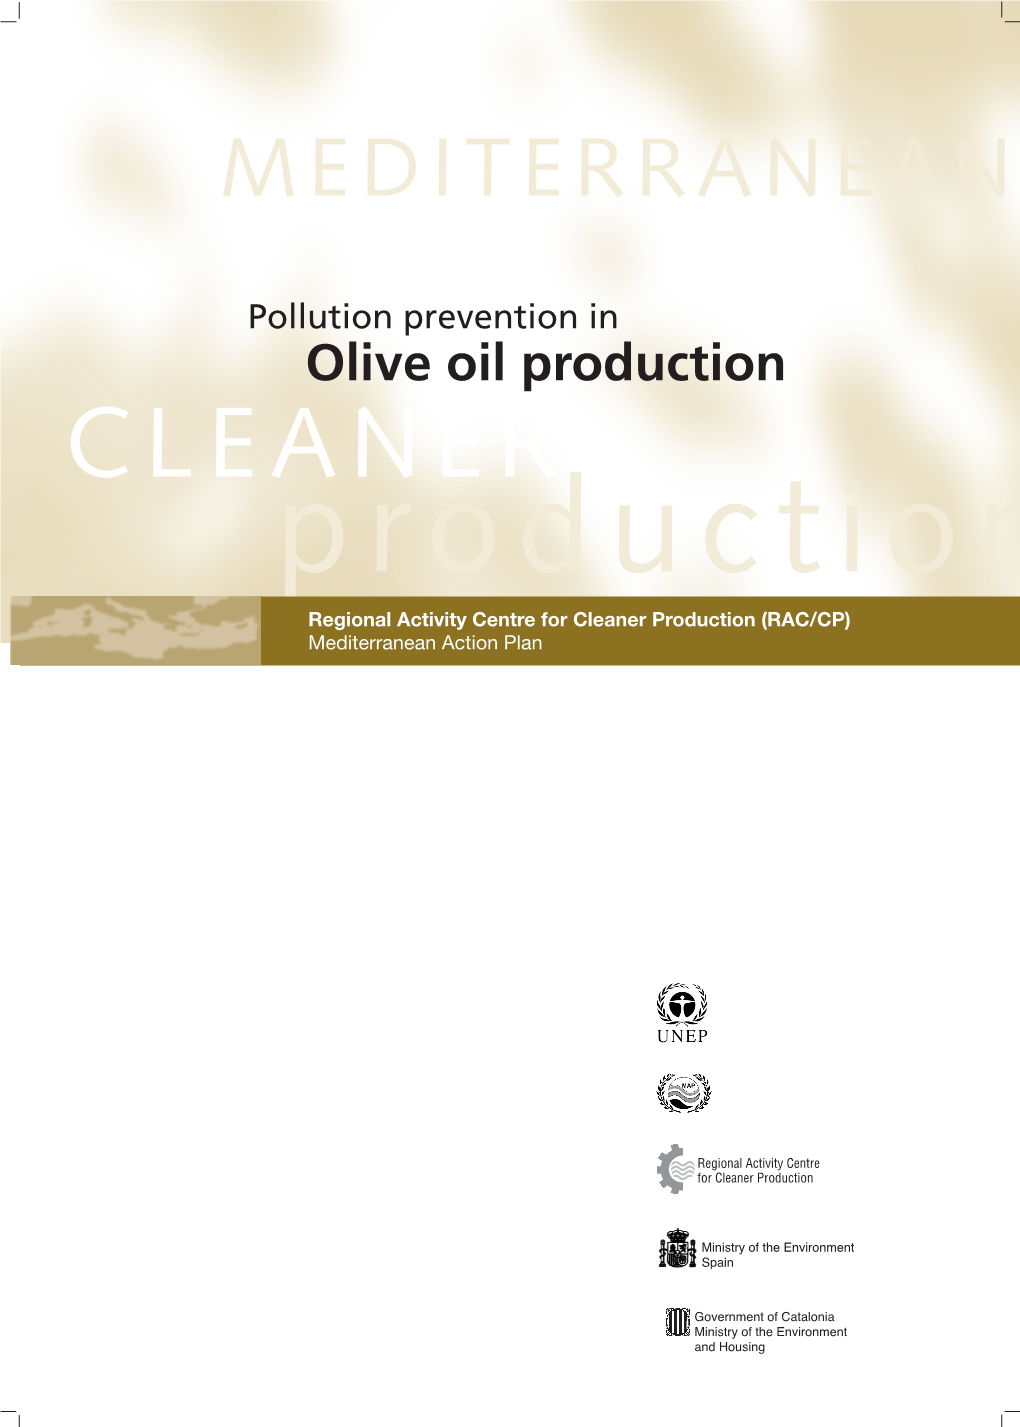 Olive Oil Production CLEANER Production Regional Activity Centre for Cleaner Production (RAC/CP) Mediterranean Action Plan